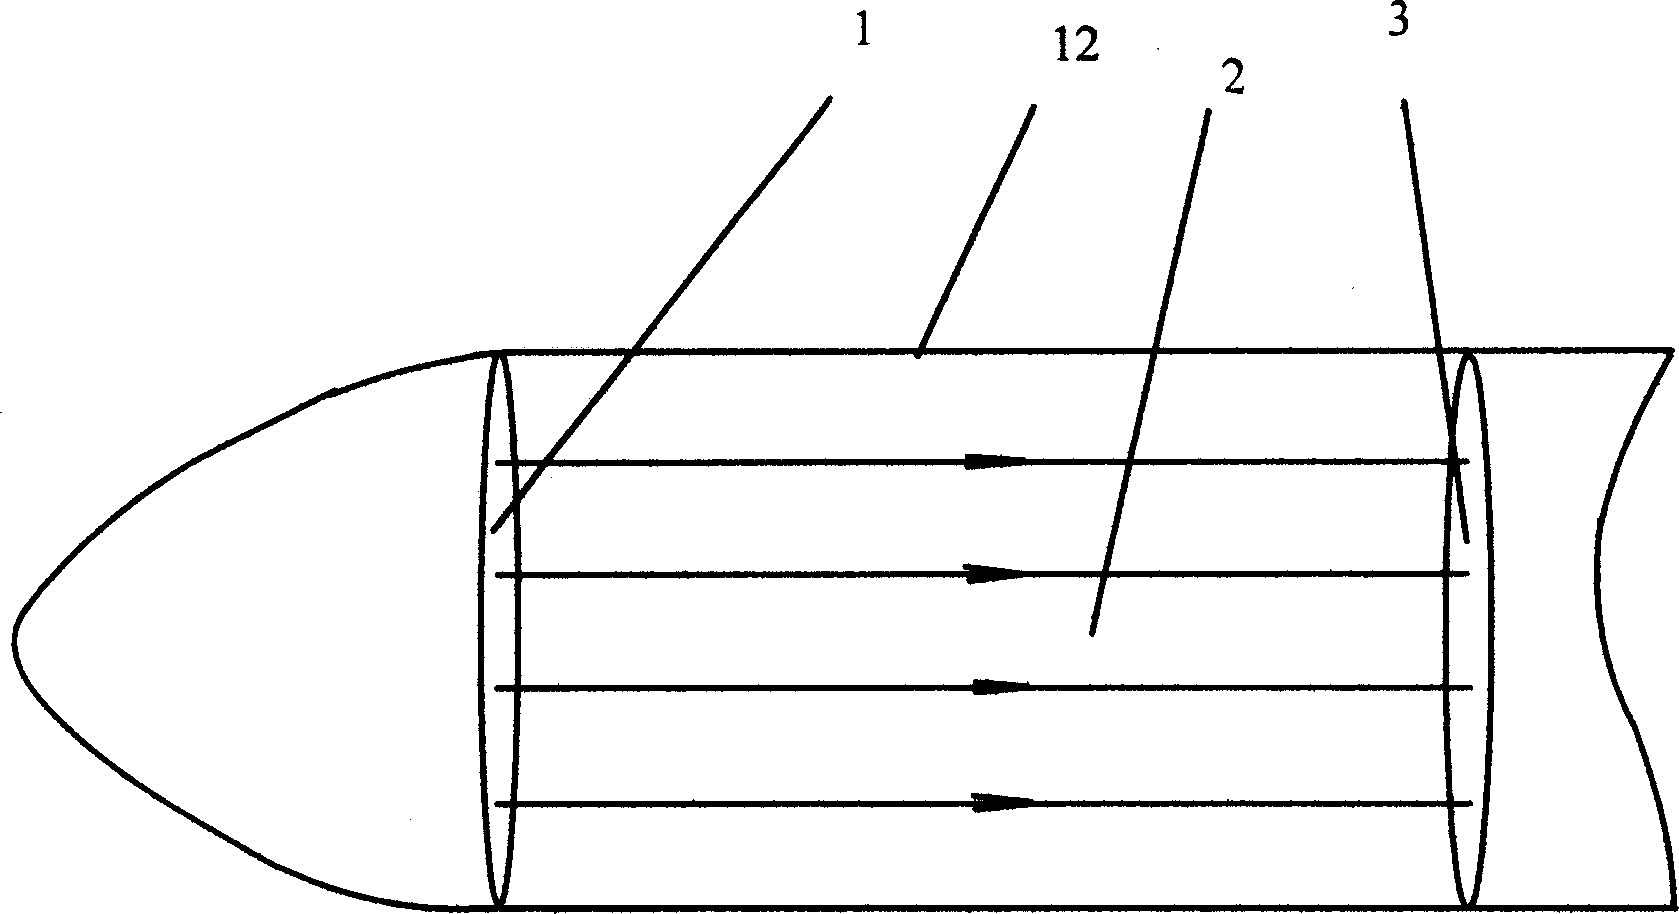 Air current circulation aircraft and method for making the same